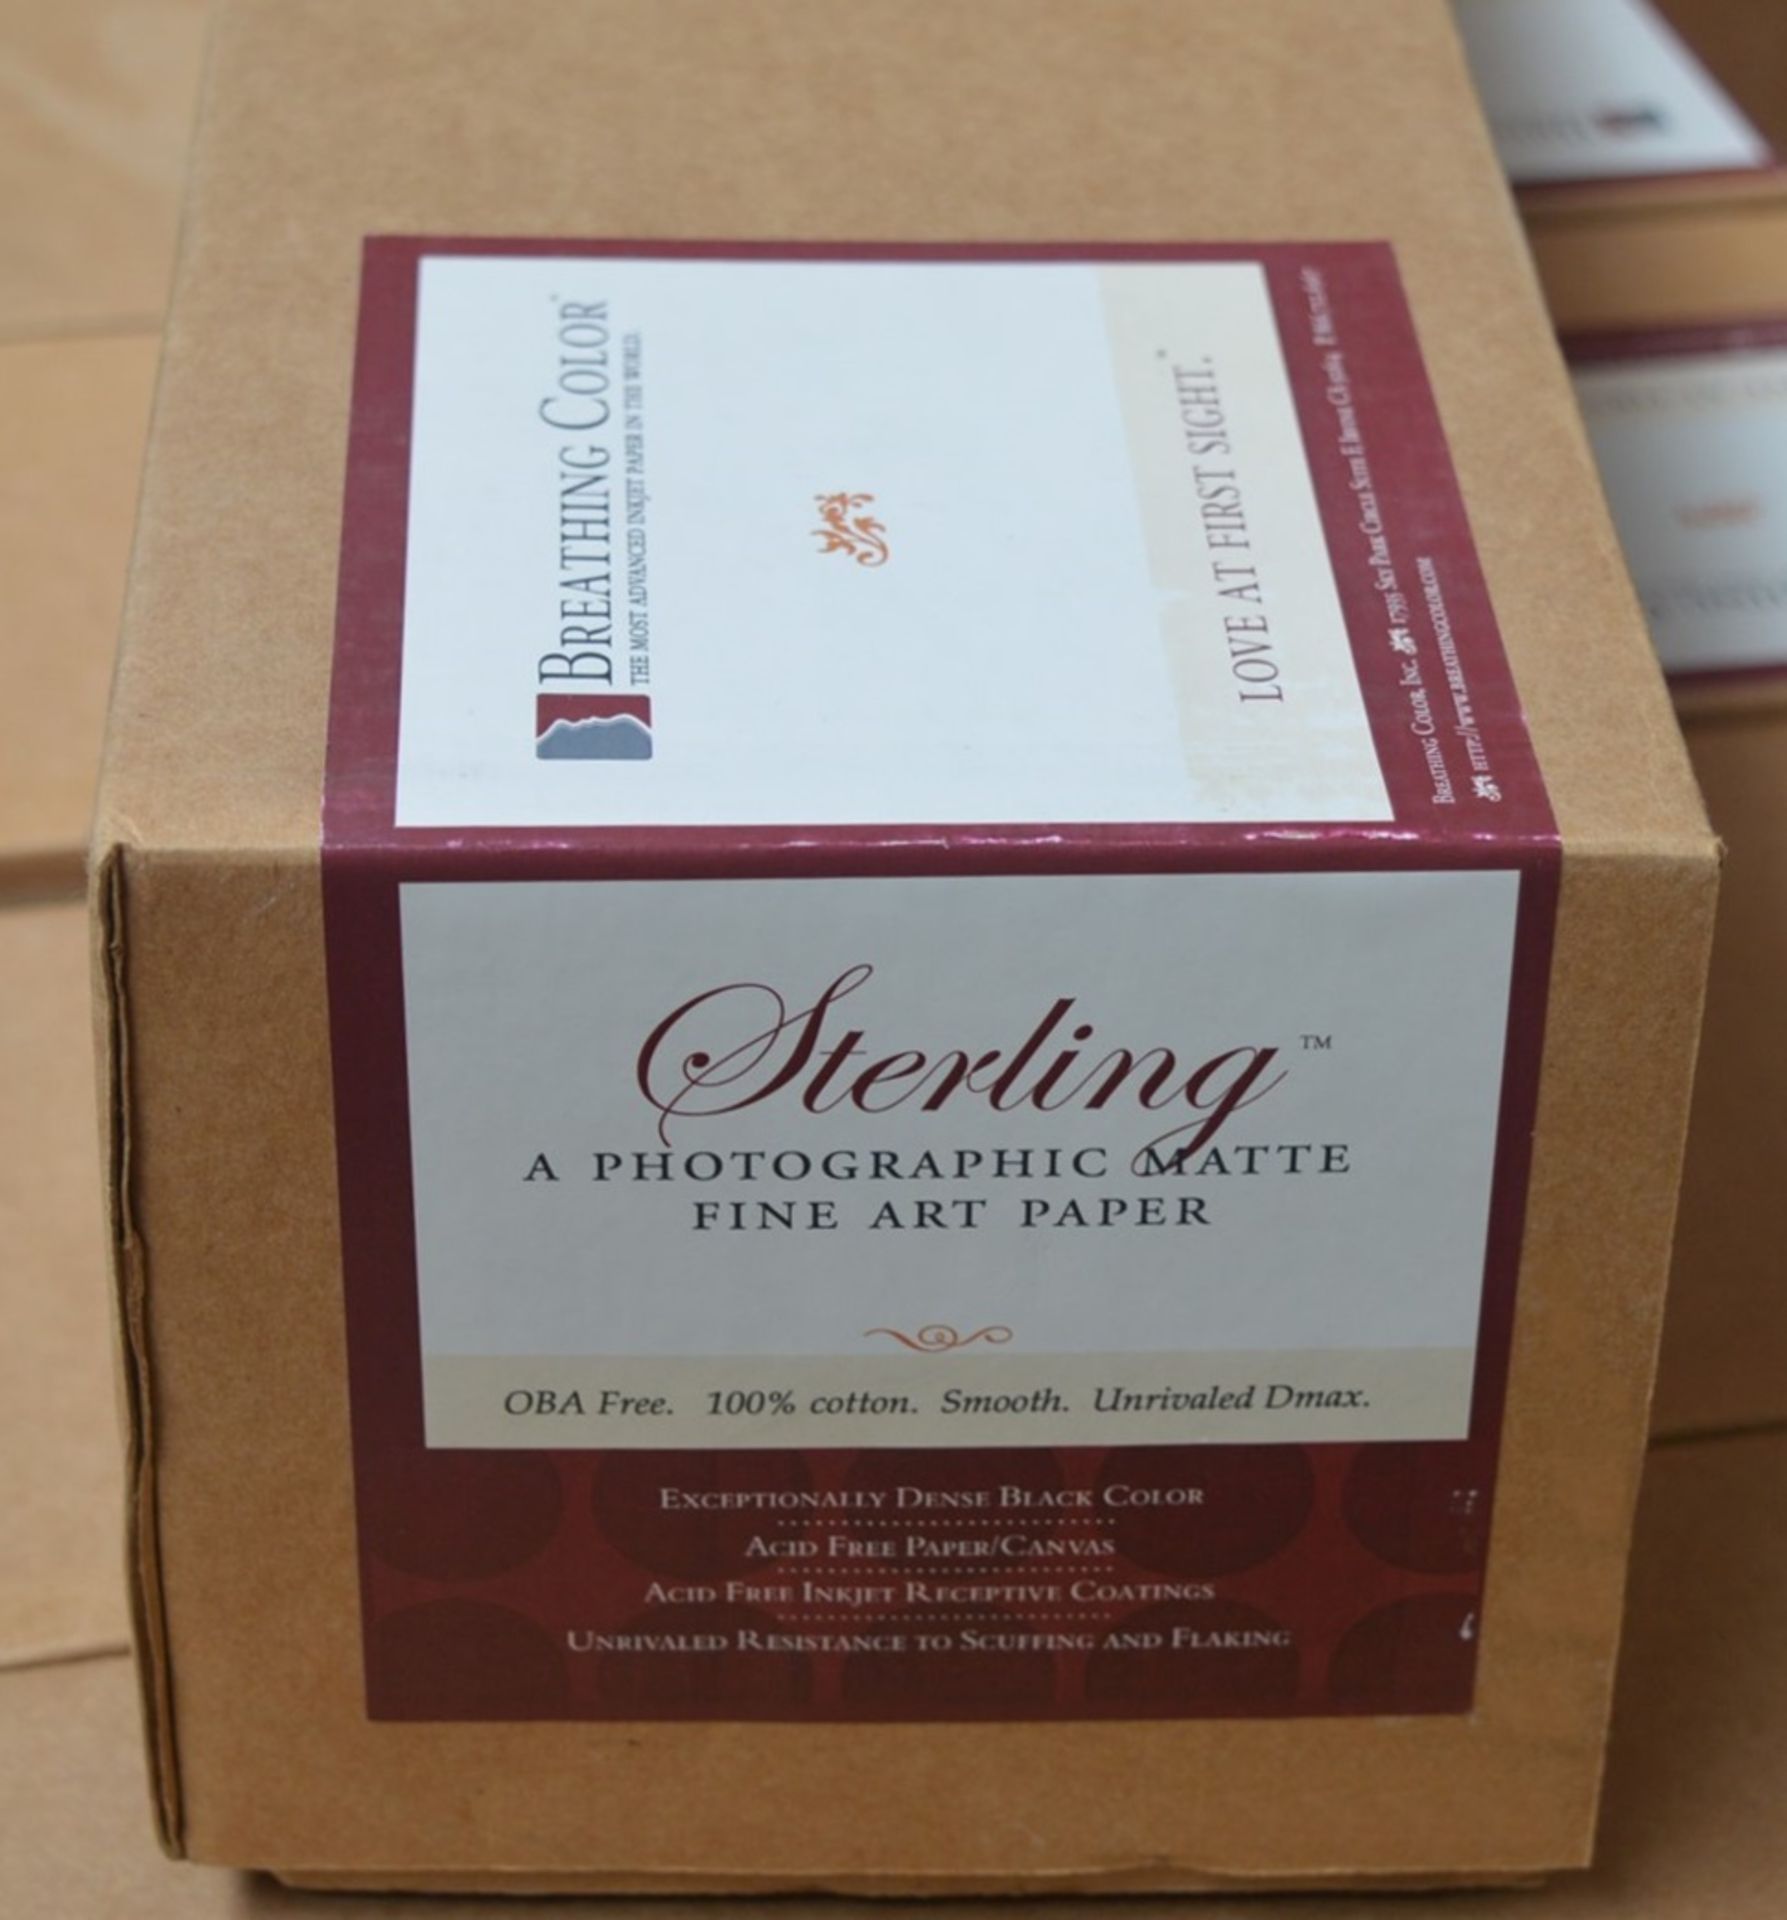 1 x Roll of Breathing Colour STERLING Photographic Matte Fine Art Paper - Size 24" x 50' - 250gsm - - Image 2 of 5